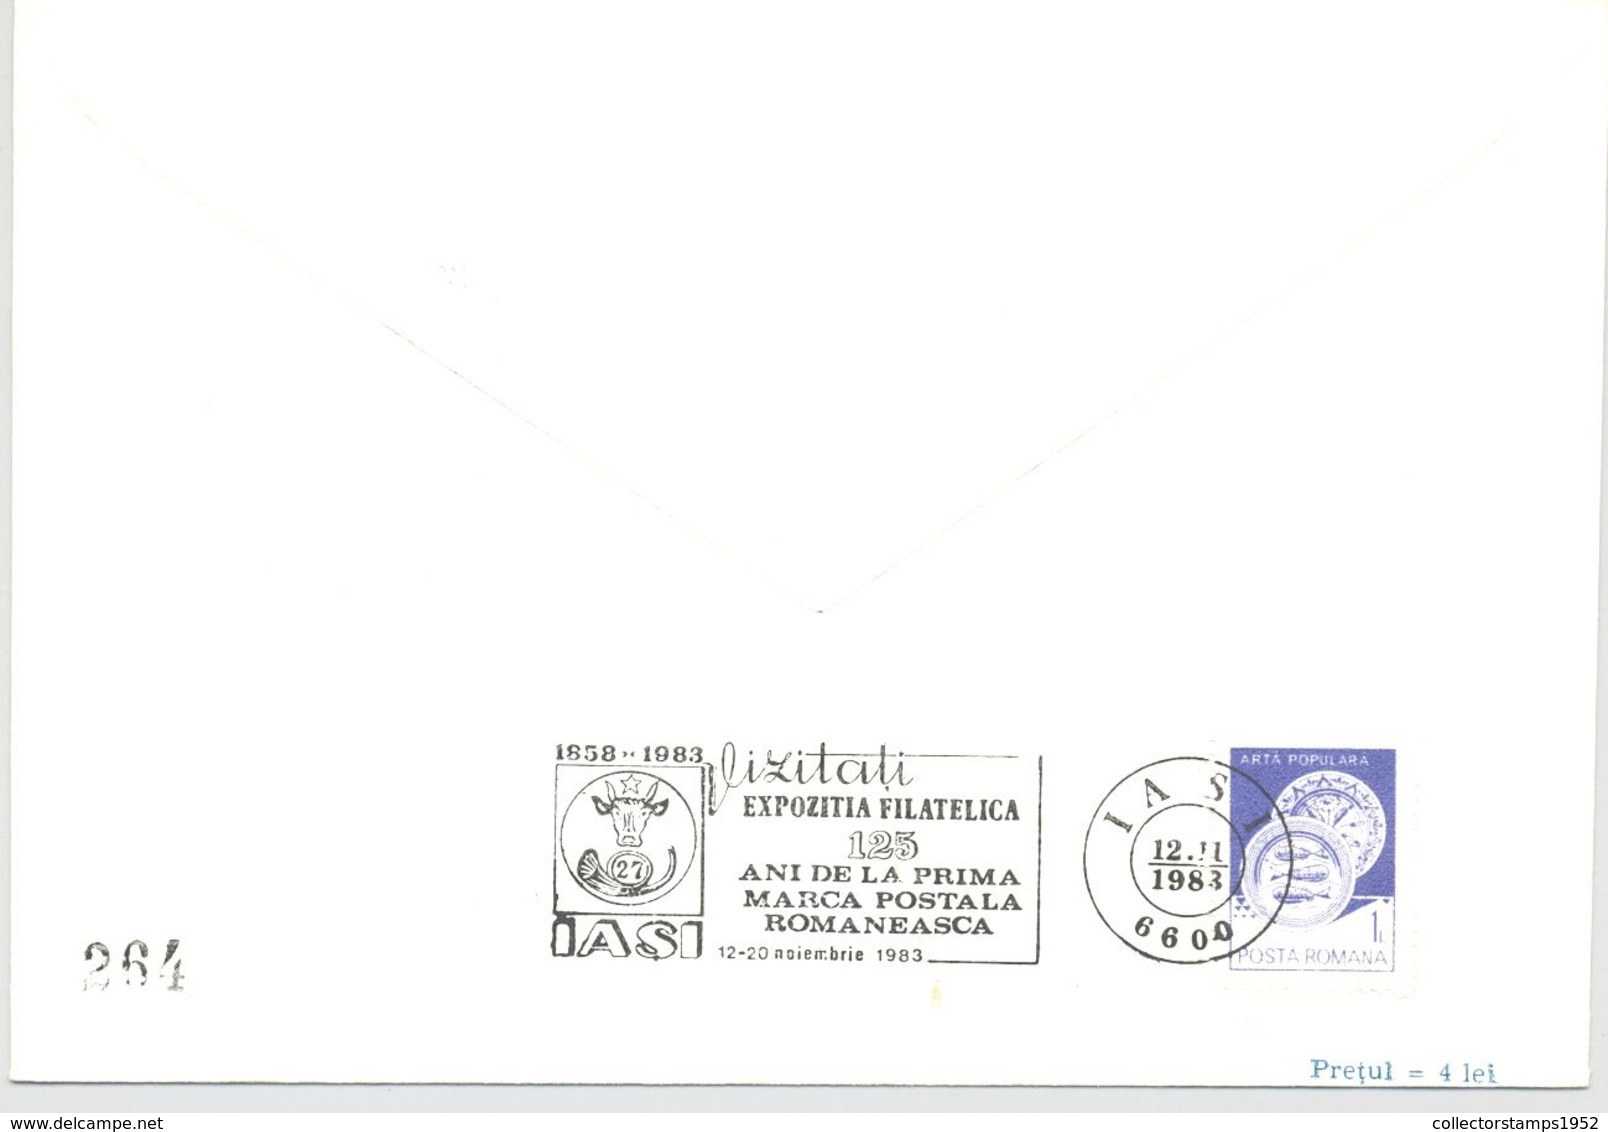 74561- FIRST ROMANIAN STAMP ANNIVERSARY, BULL'S HEAD, SPECIAL COVER, 1983, ROMANIA - Covers & Documents